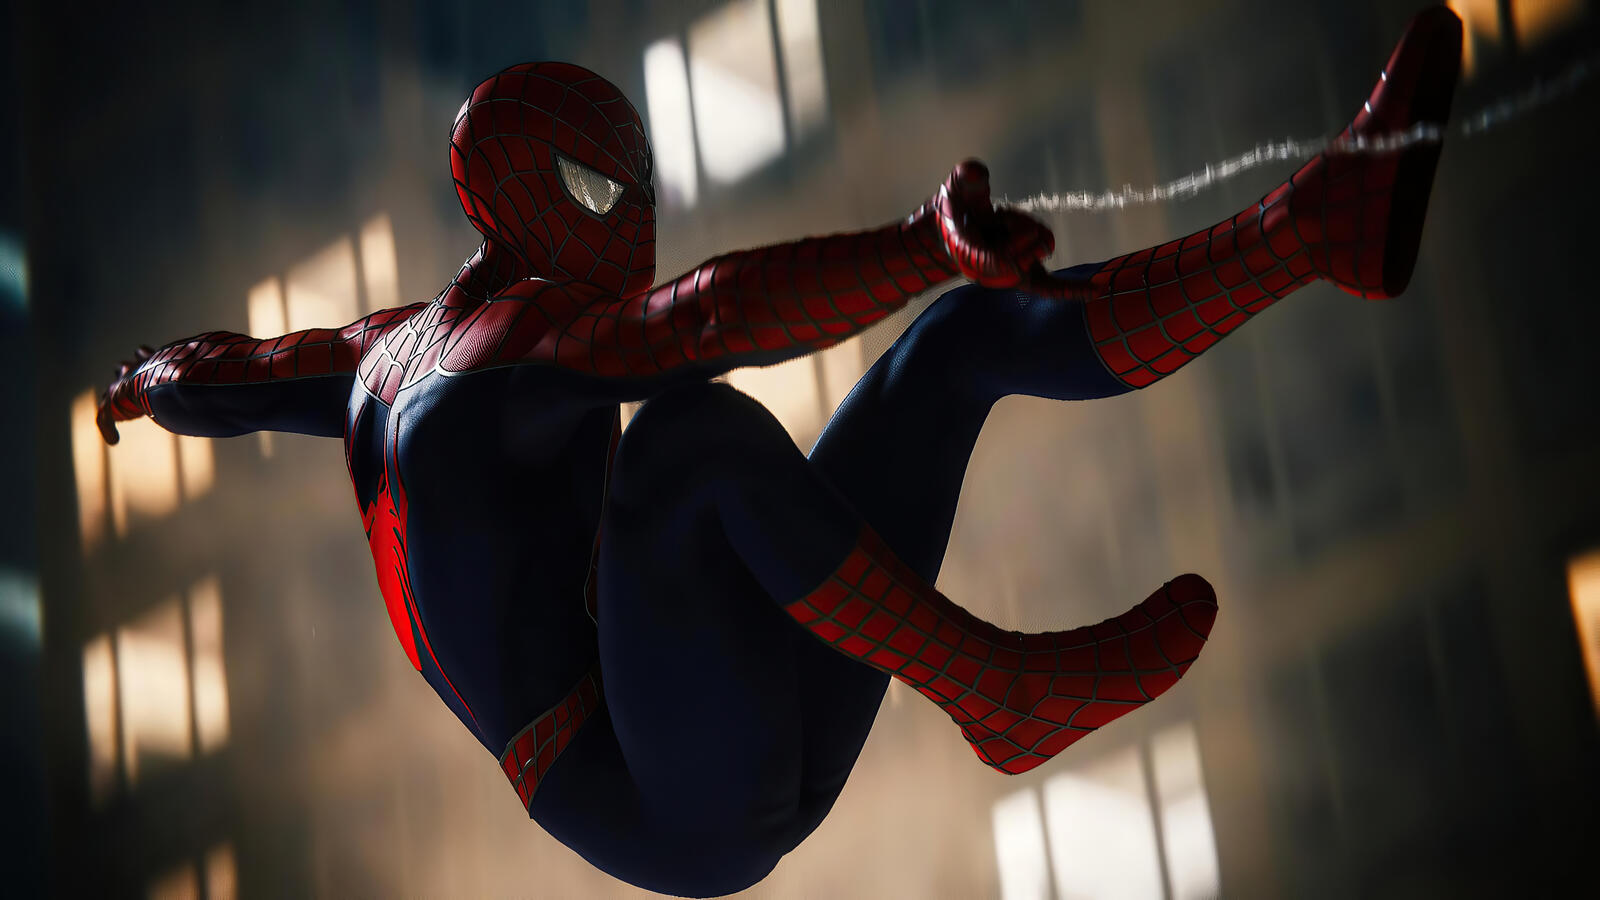 Wallpapers Spiderman PS4 spider web spider man on the desktop